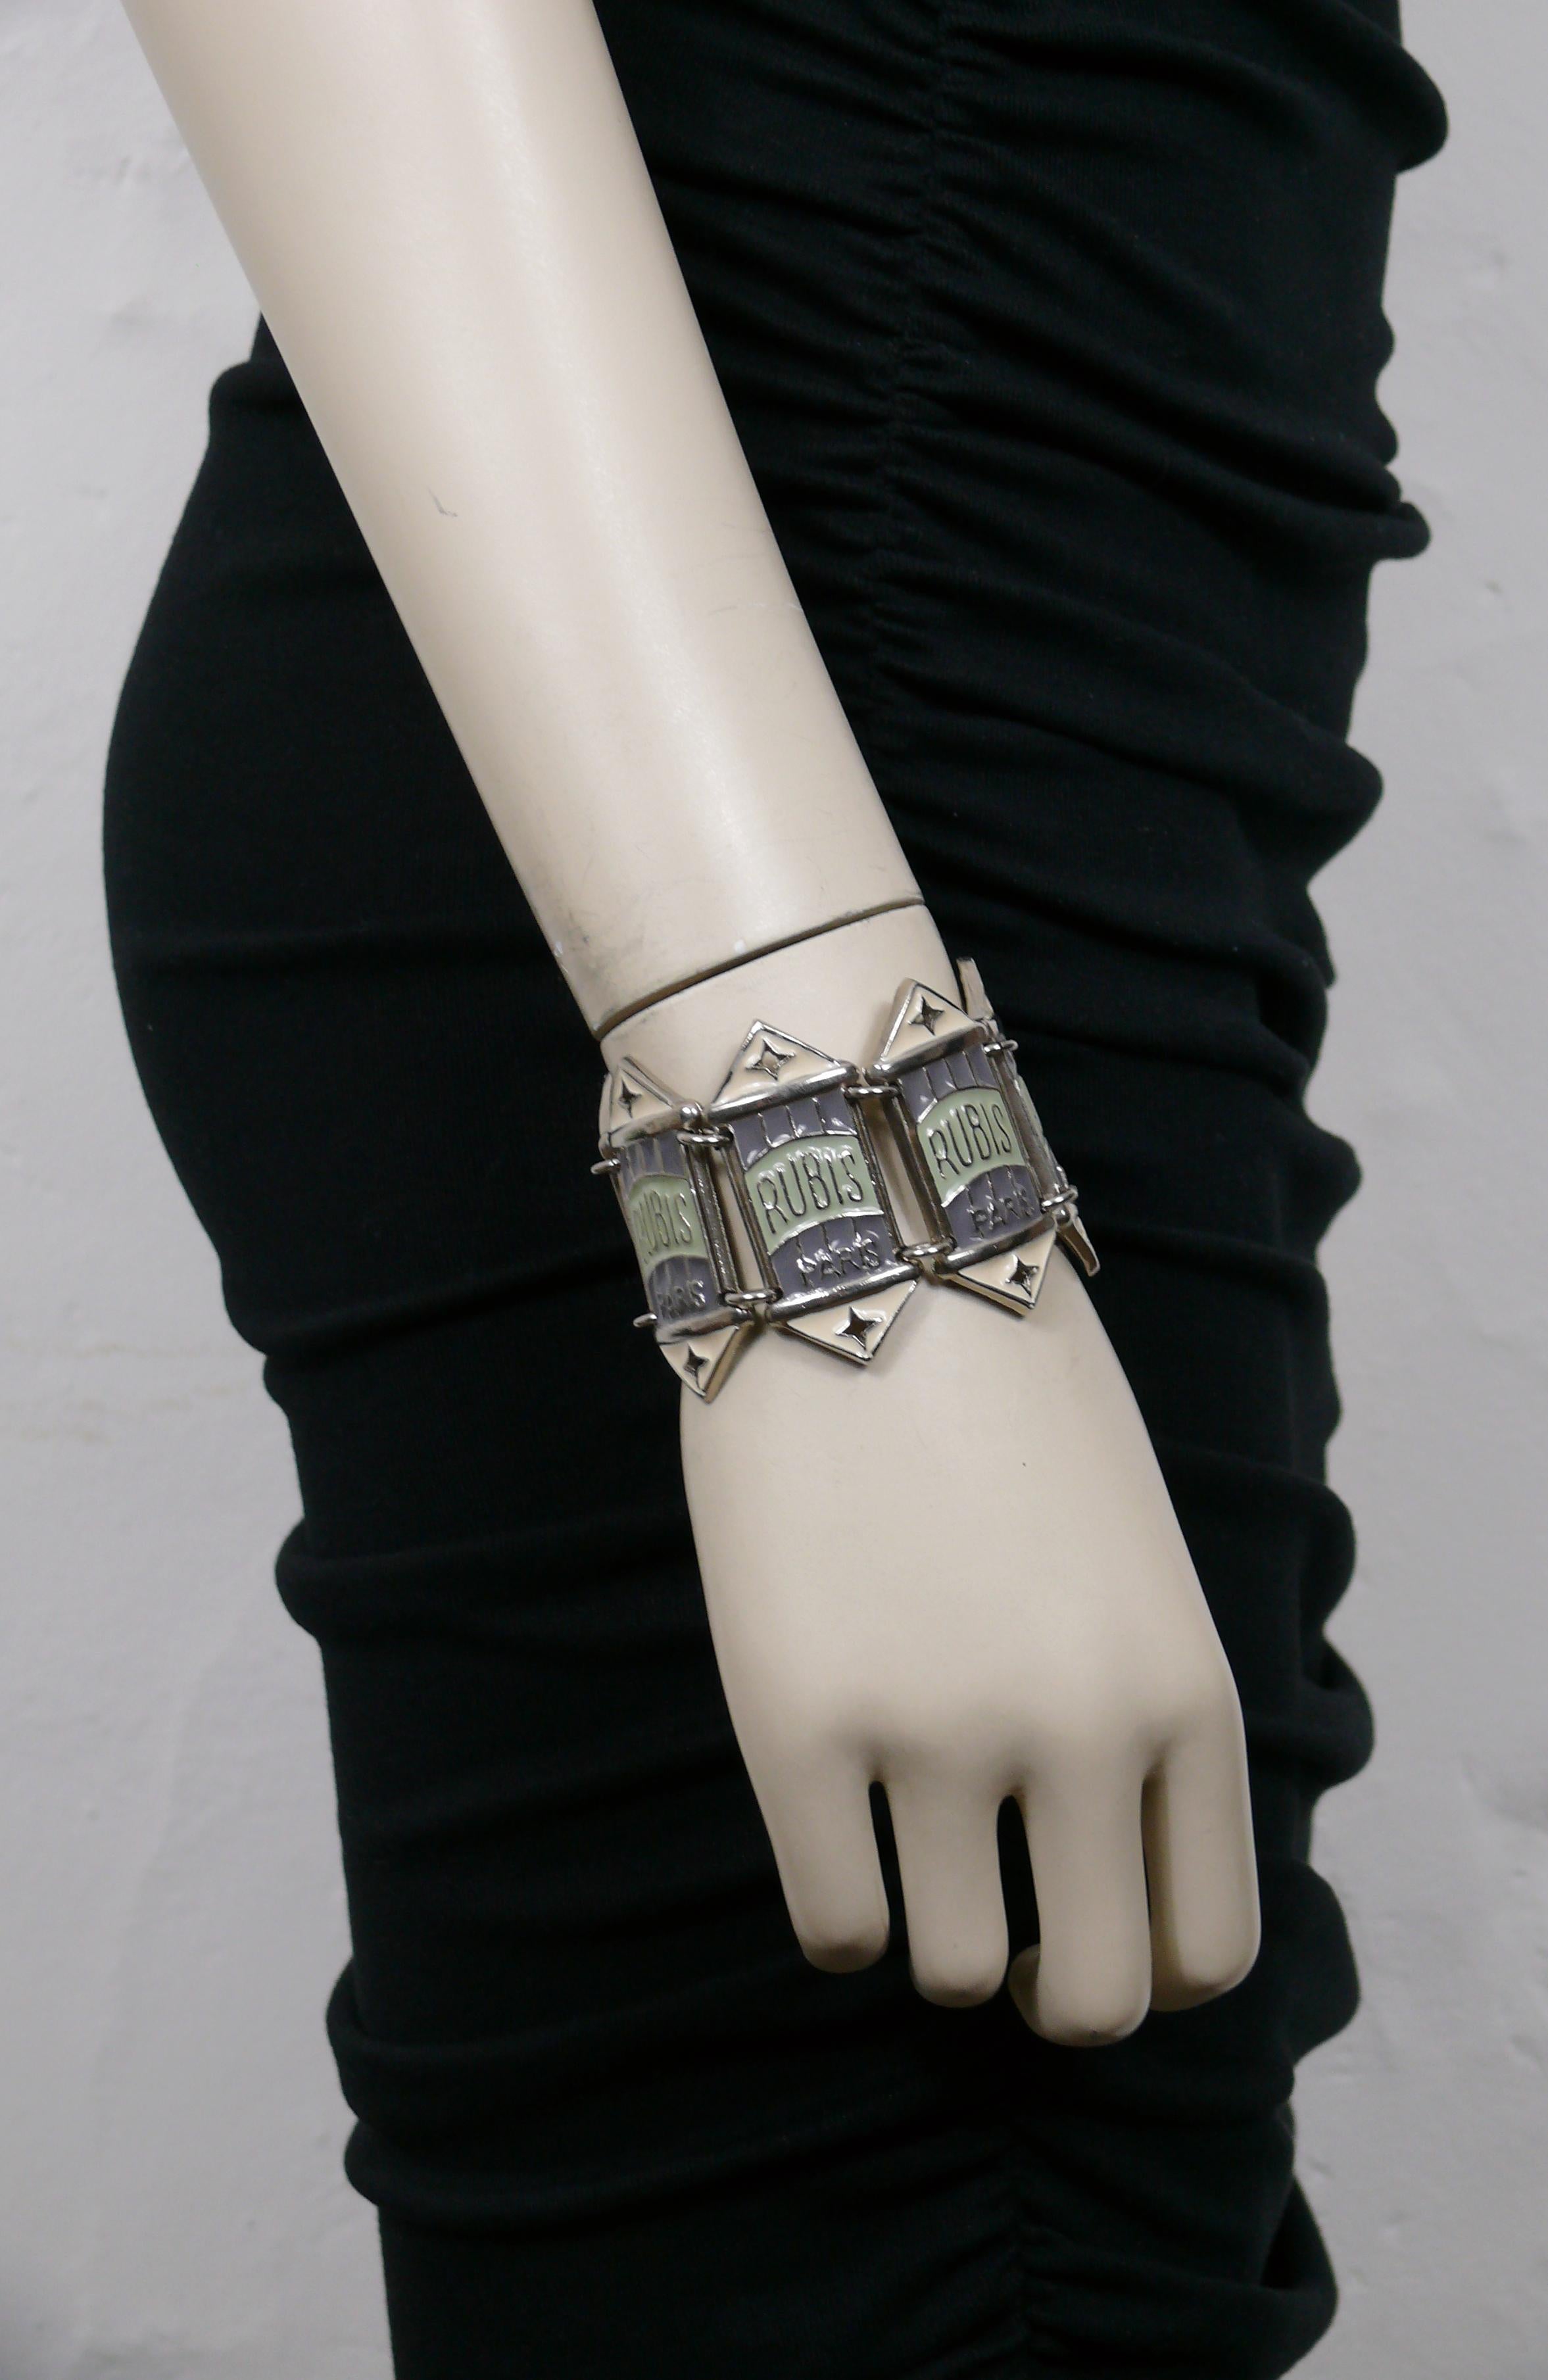 JEAN PAUL GAULTIER vintage RUBIS PARIS silver tone cuff bracelet featuring green, off-white and grey enameled links.

Box clasp closure.

Embossed JPG on the reveres of each links.

Indicative measurements : length approx. 16.3 cm (6.42 inches) /